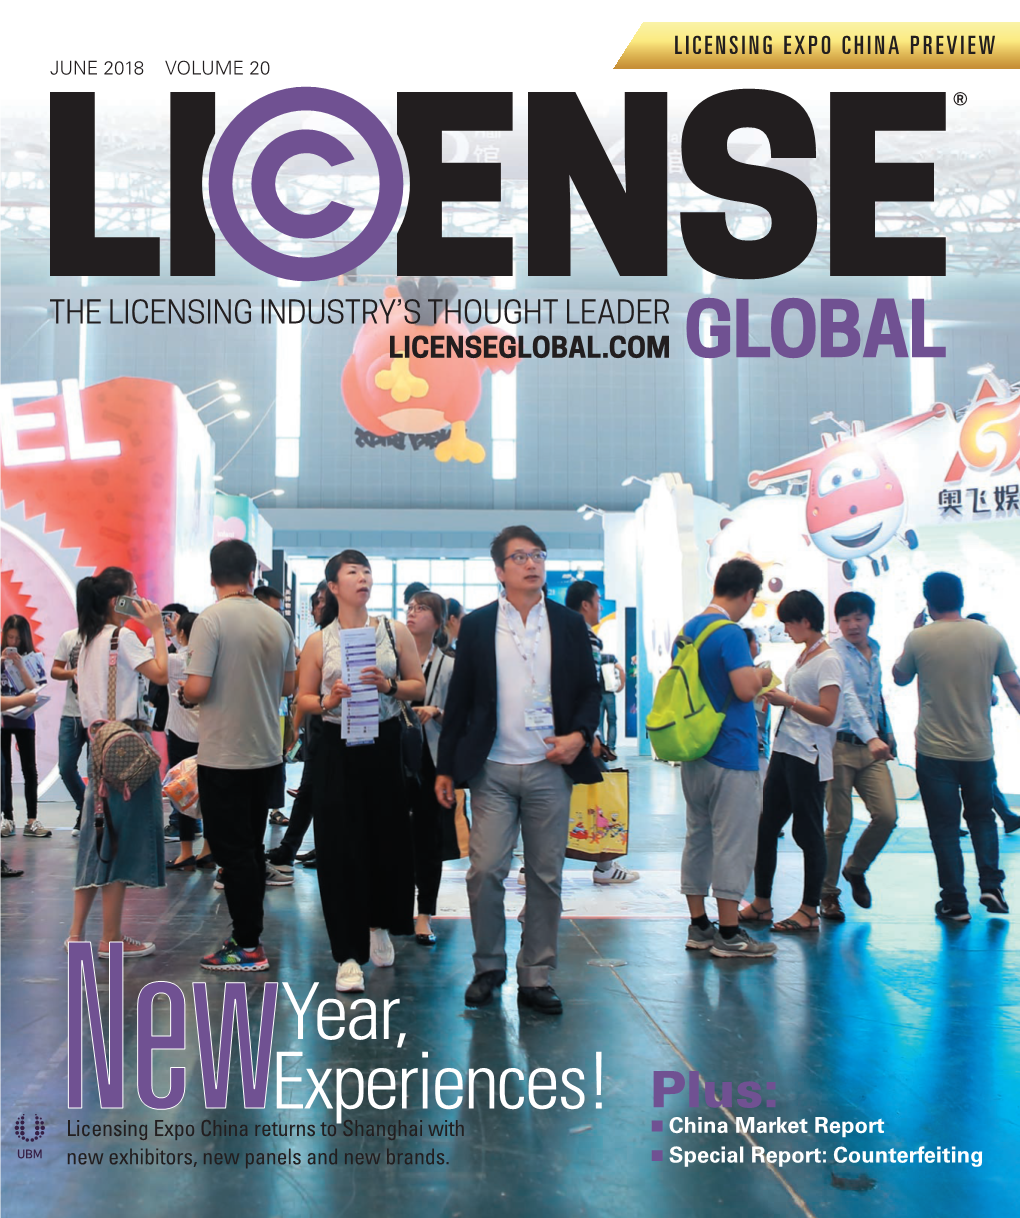 LICENSING EXPO CHINA PREVIEW License Global JUNE 2018 VOLUME 20 LICENSING EXPO CHINA